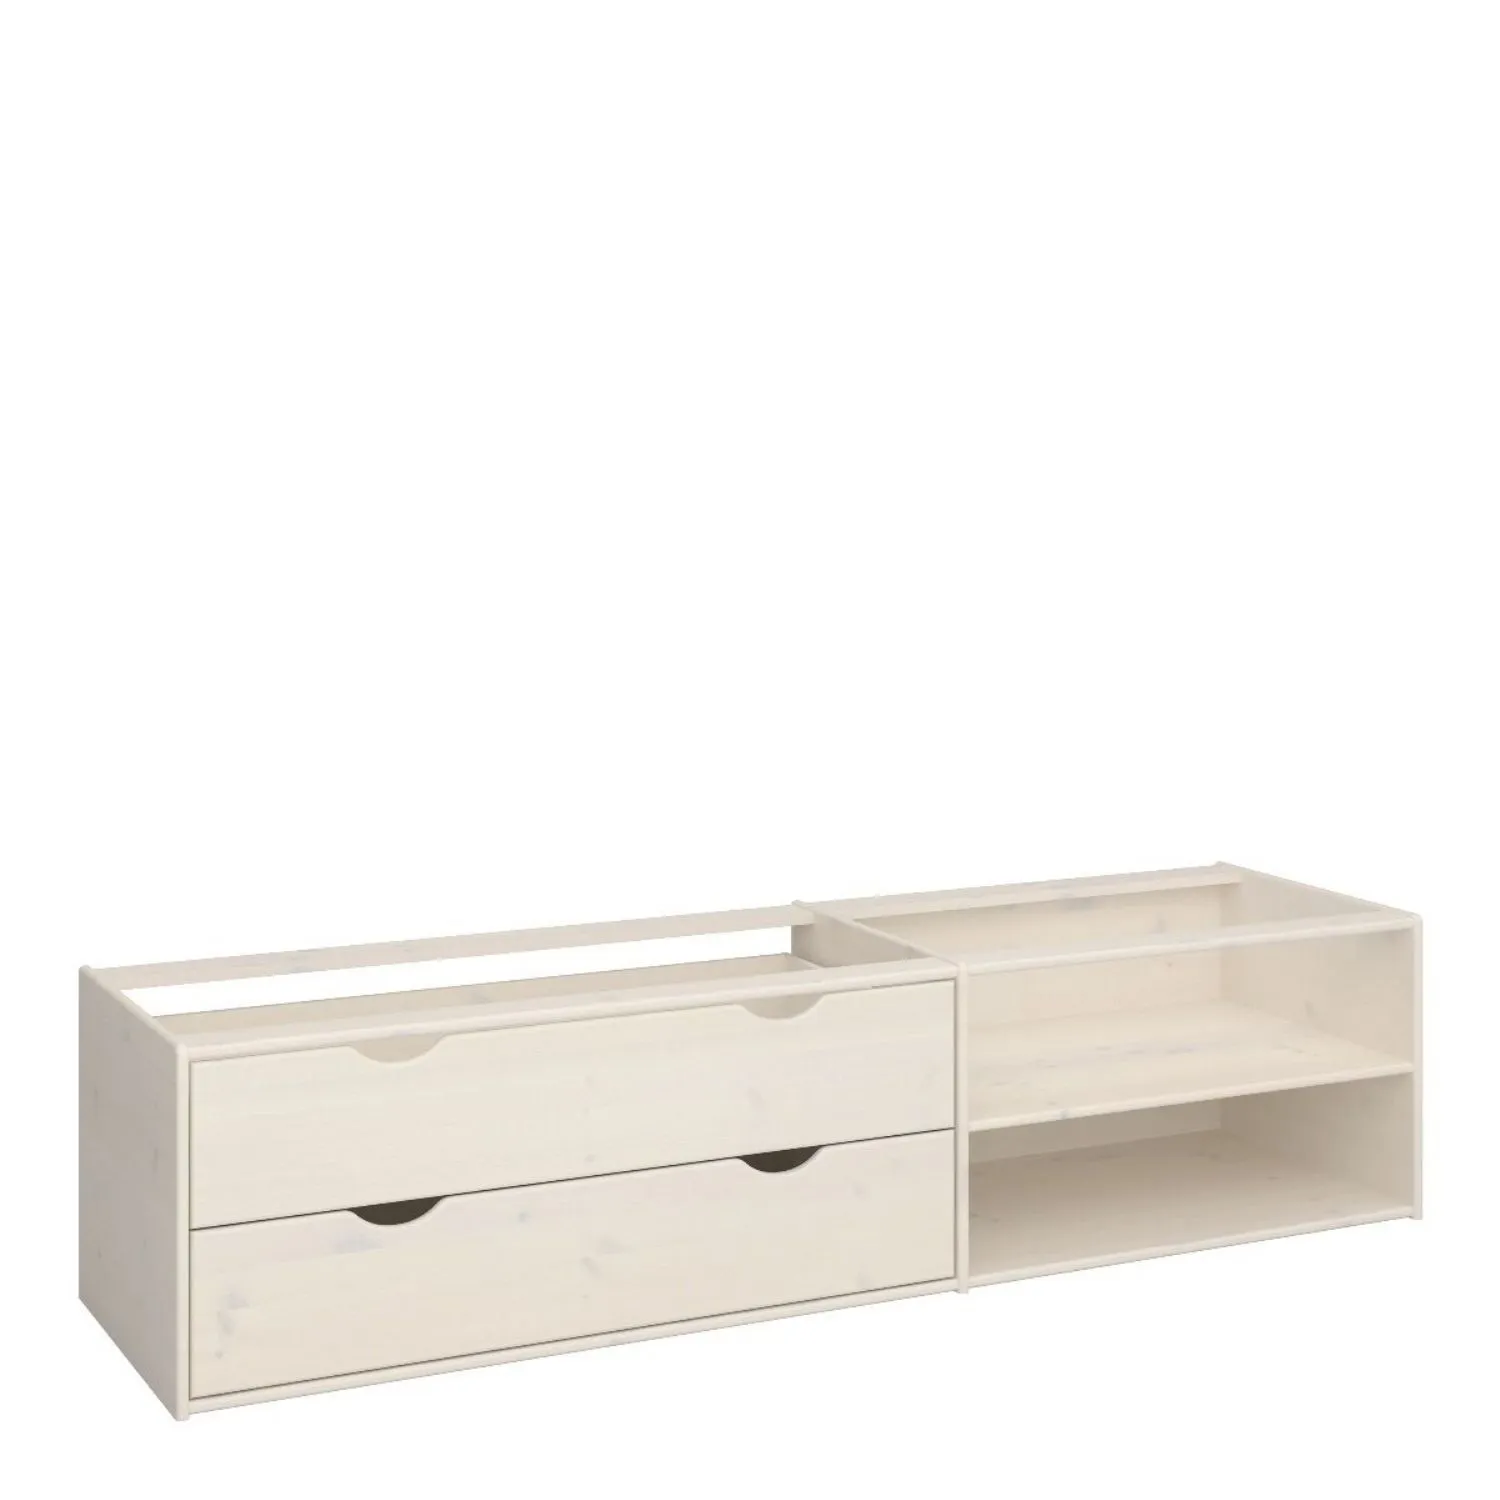 Steens For Kids Underbed Drawer section 2 Drawers in Whitewash